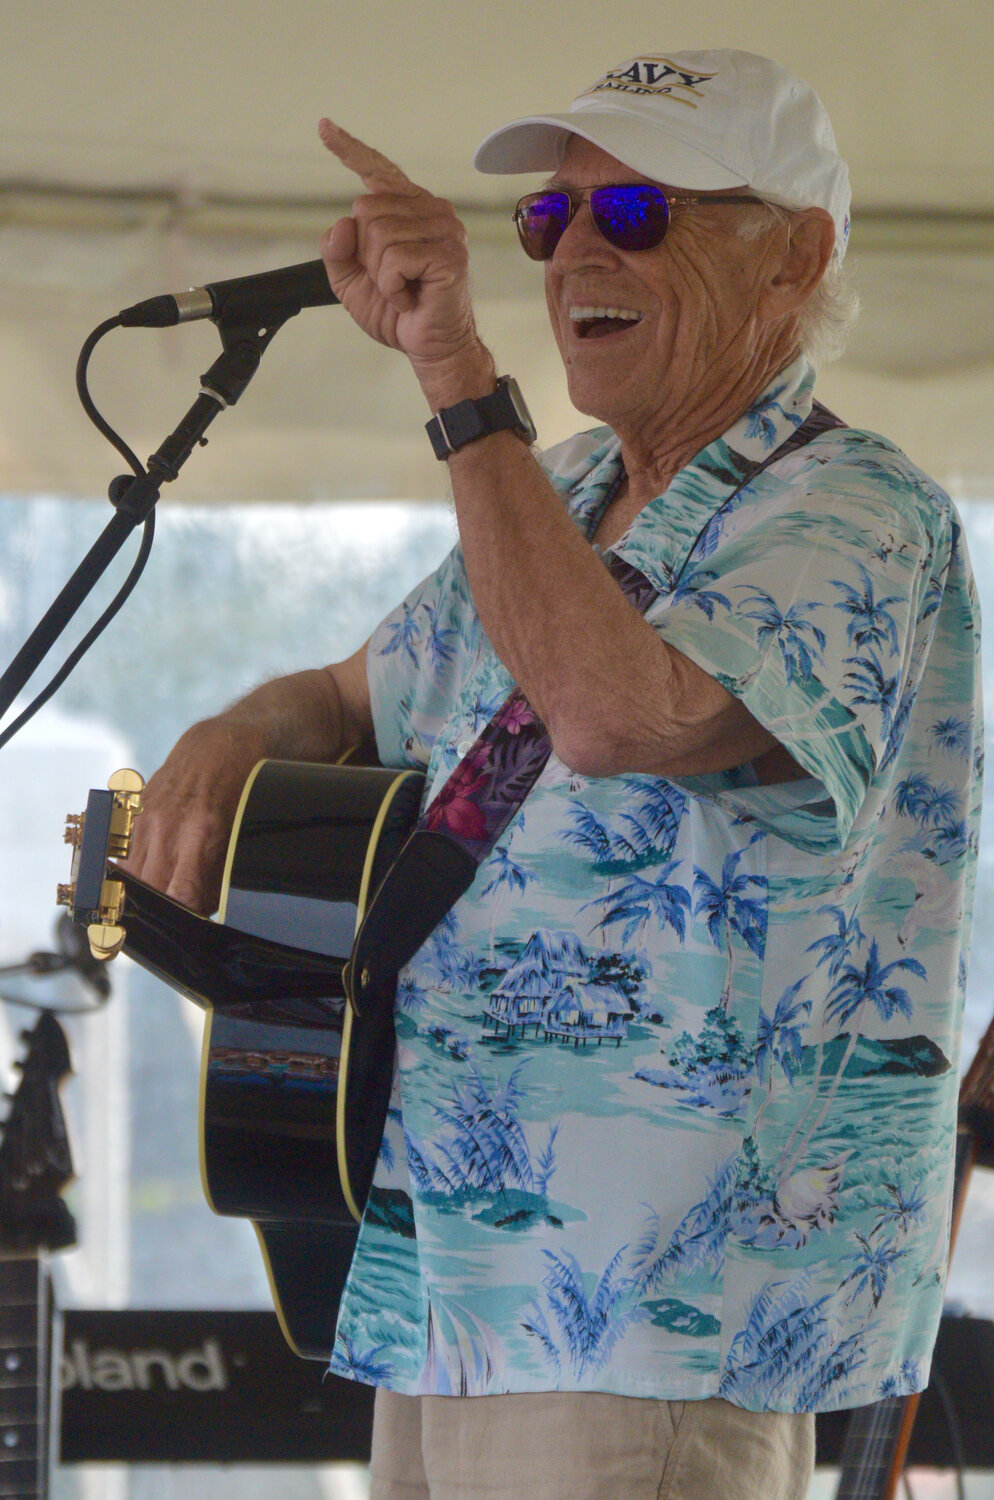 Jimmy Buffett had the crowd eating out of his hand during his generous set.